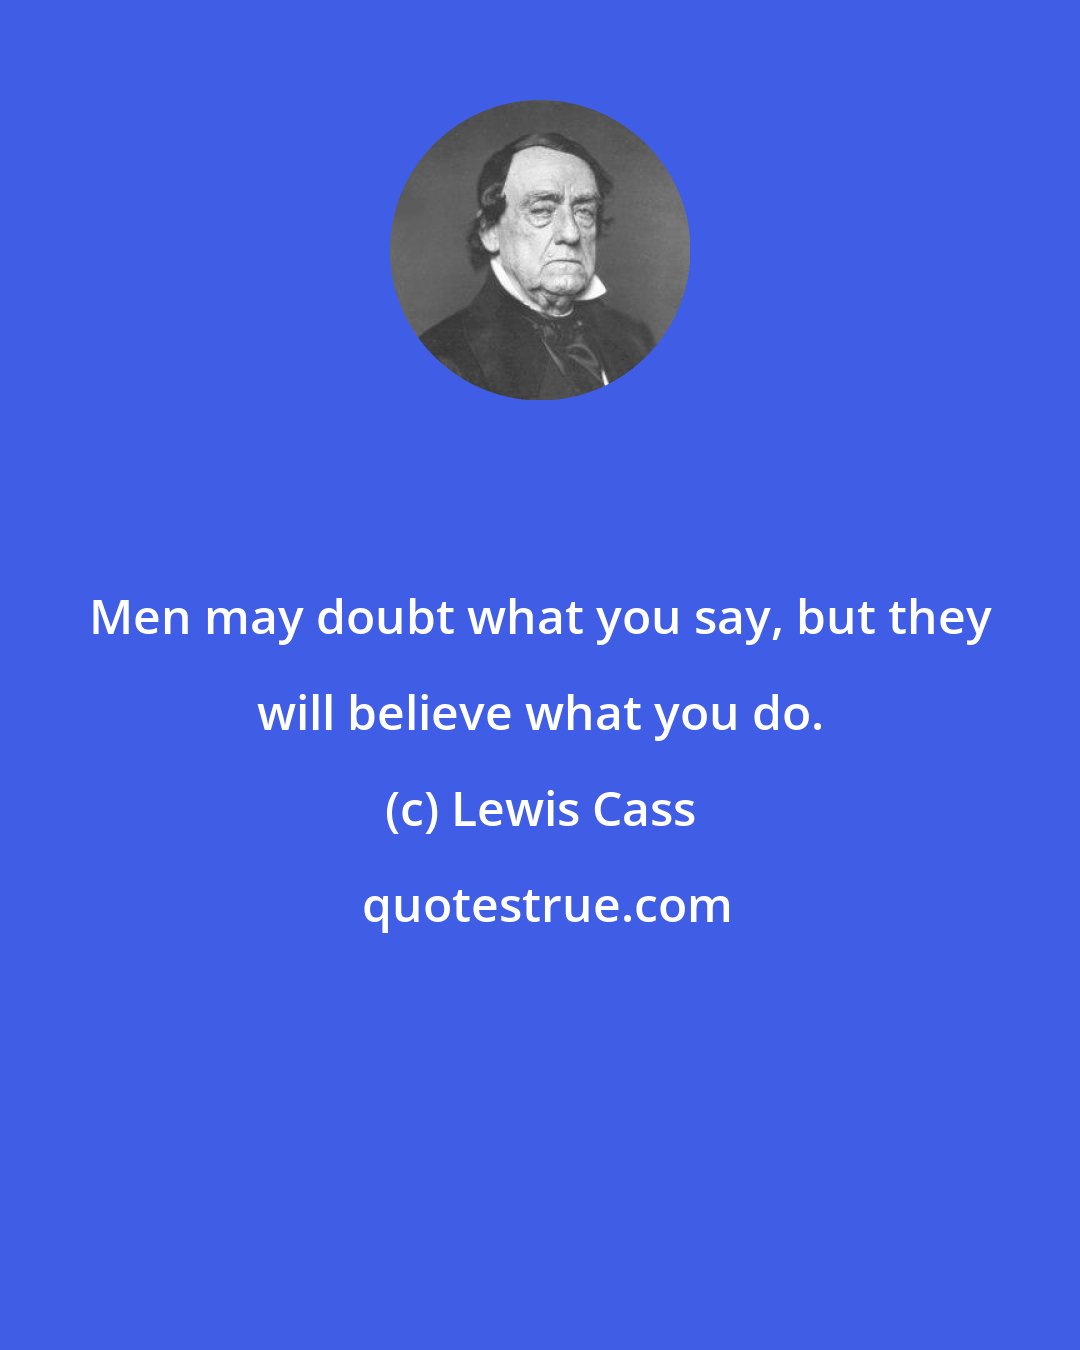 Lewis Cass: Men may doubt what you say, but they will believe what you do.